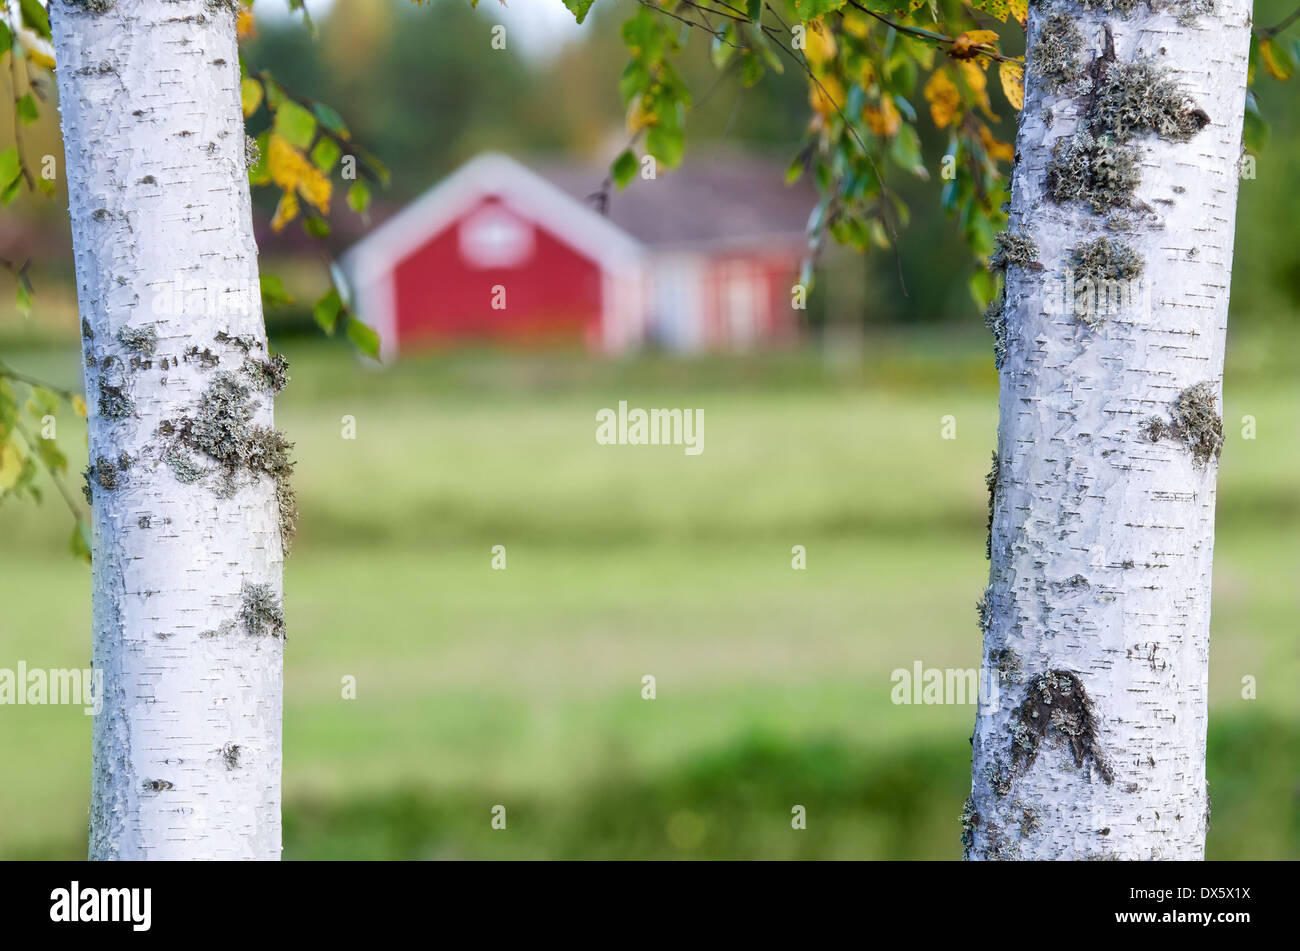 Summer country scenery framed by two birch tree trunks Stock Photo